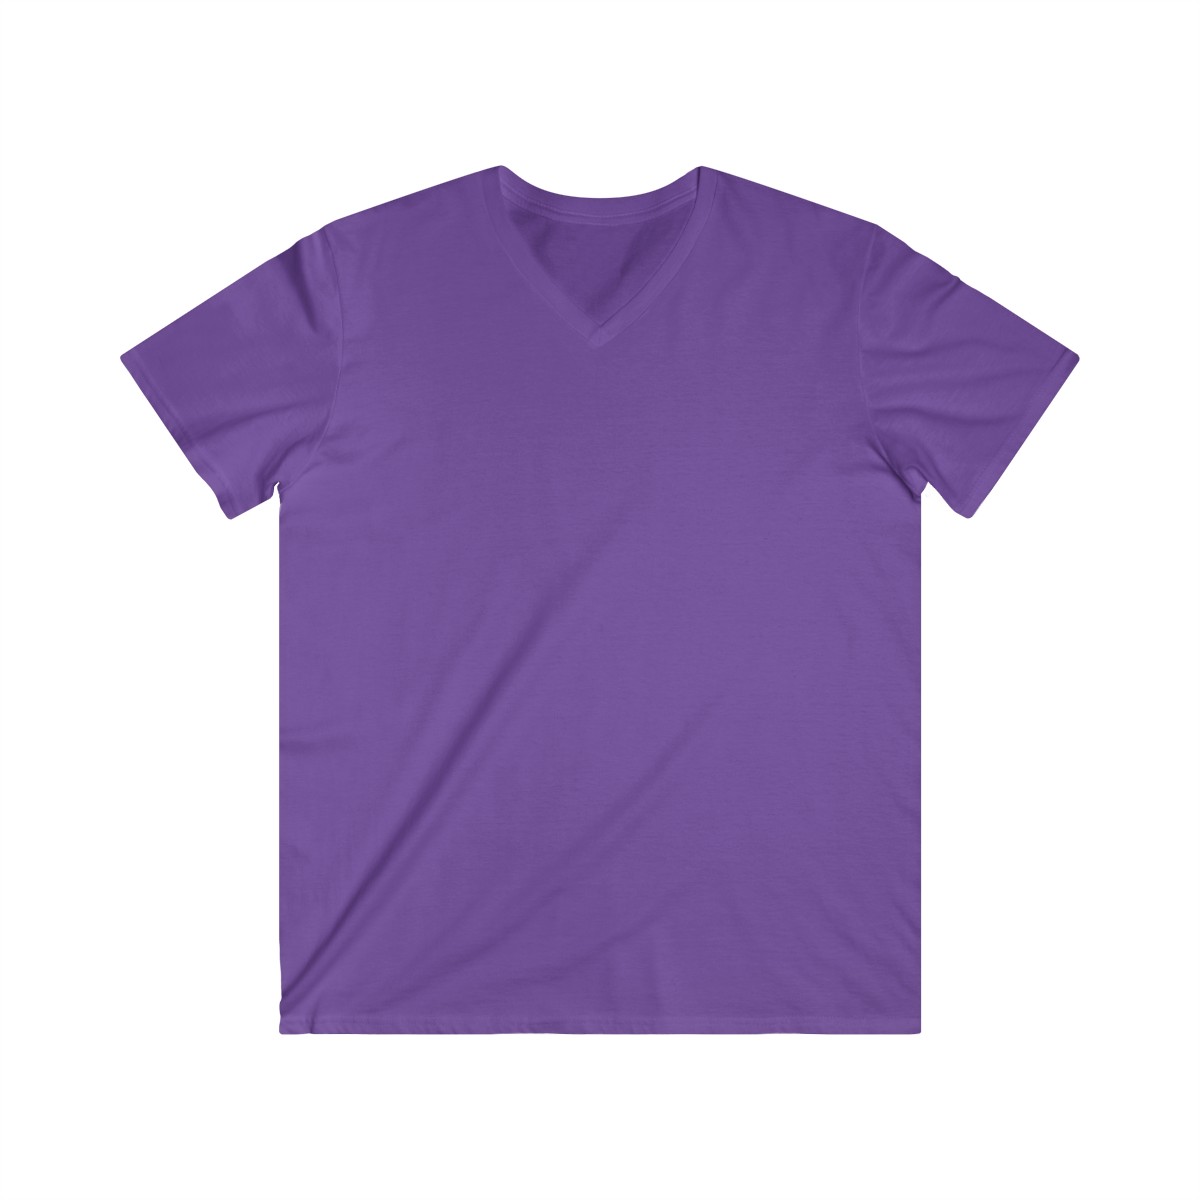 𝑷𝒓𝒊𝒏𝒄𝒆 𝑻𝒓𝒊𝒃𝒖𝒕𝒆 𝑭𝒊𝒏𝒂𝒍𝒆 Men's Fitted V-Neck Tee product thumbnail image